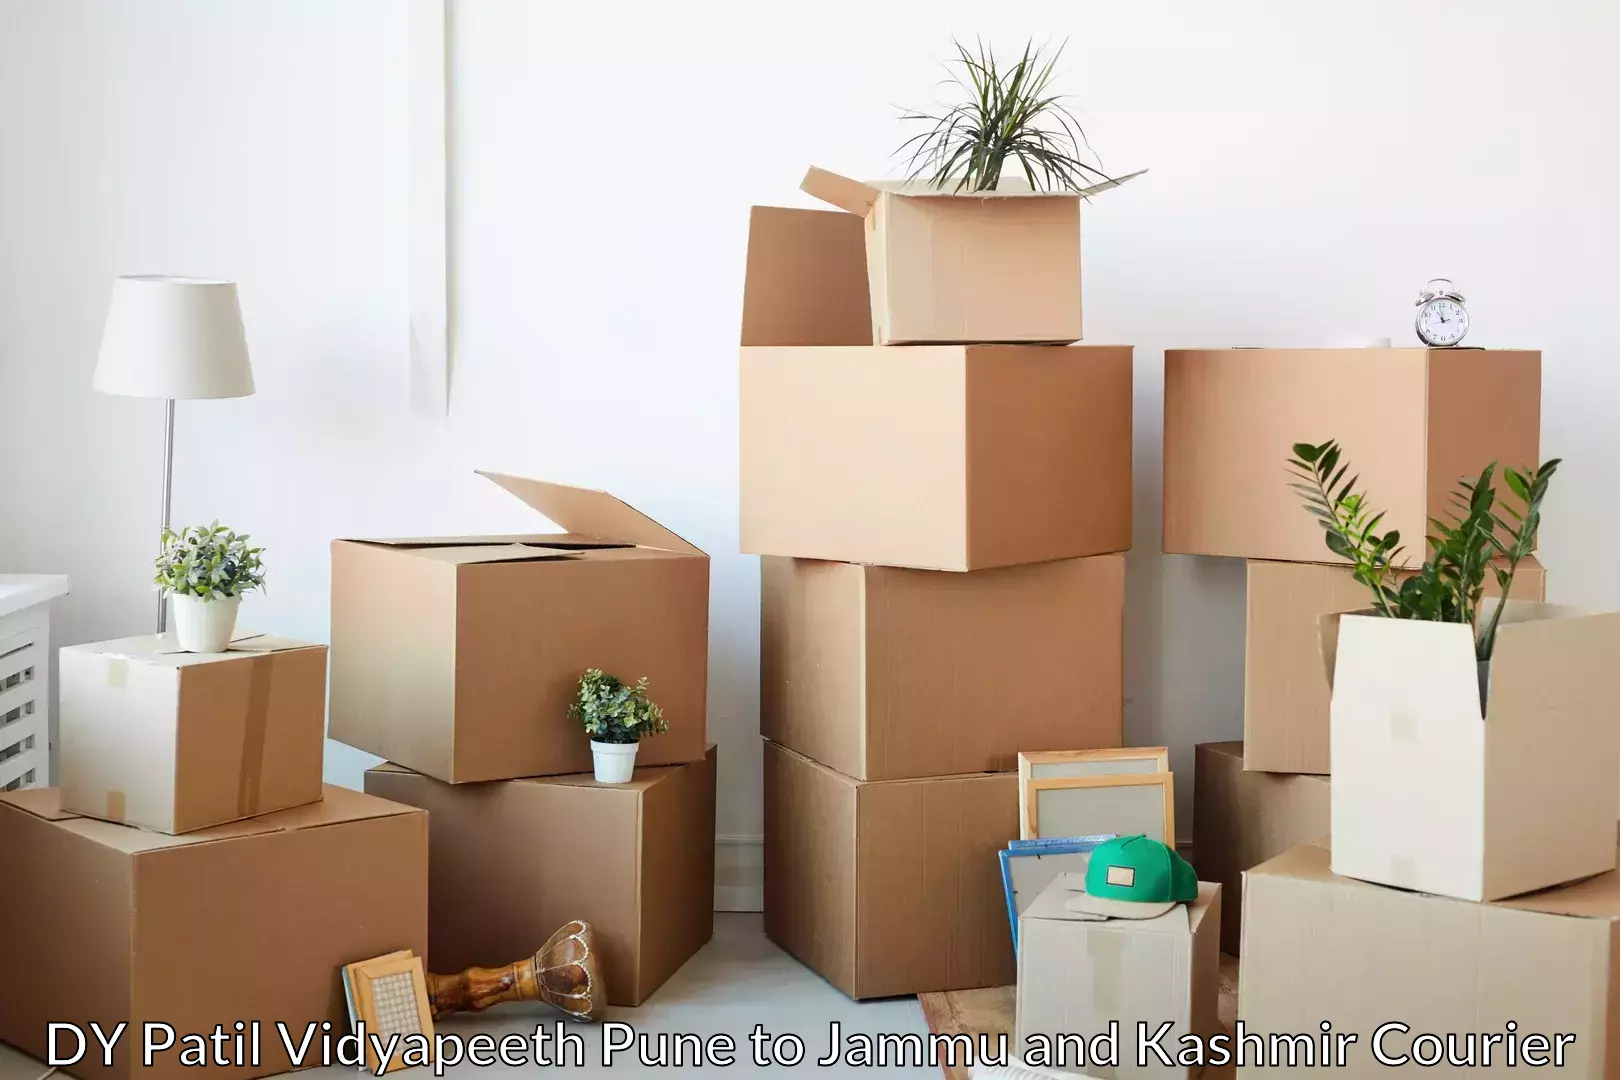 Professional moving company DY Patil Vidyapeeth Pune to Udhampur